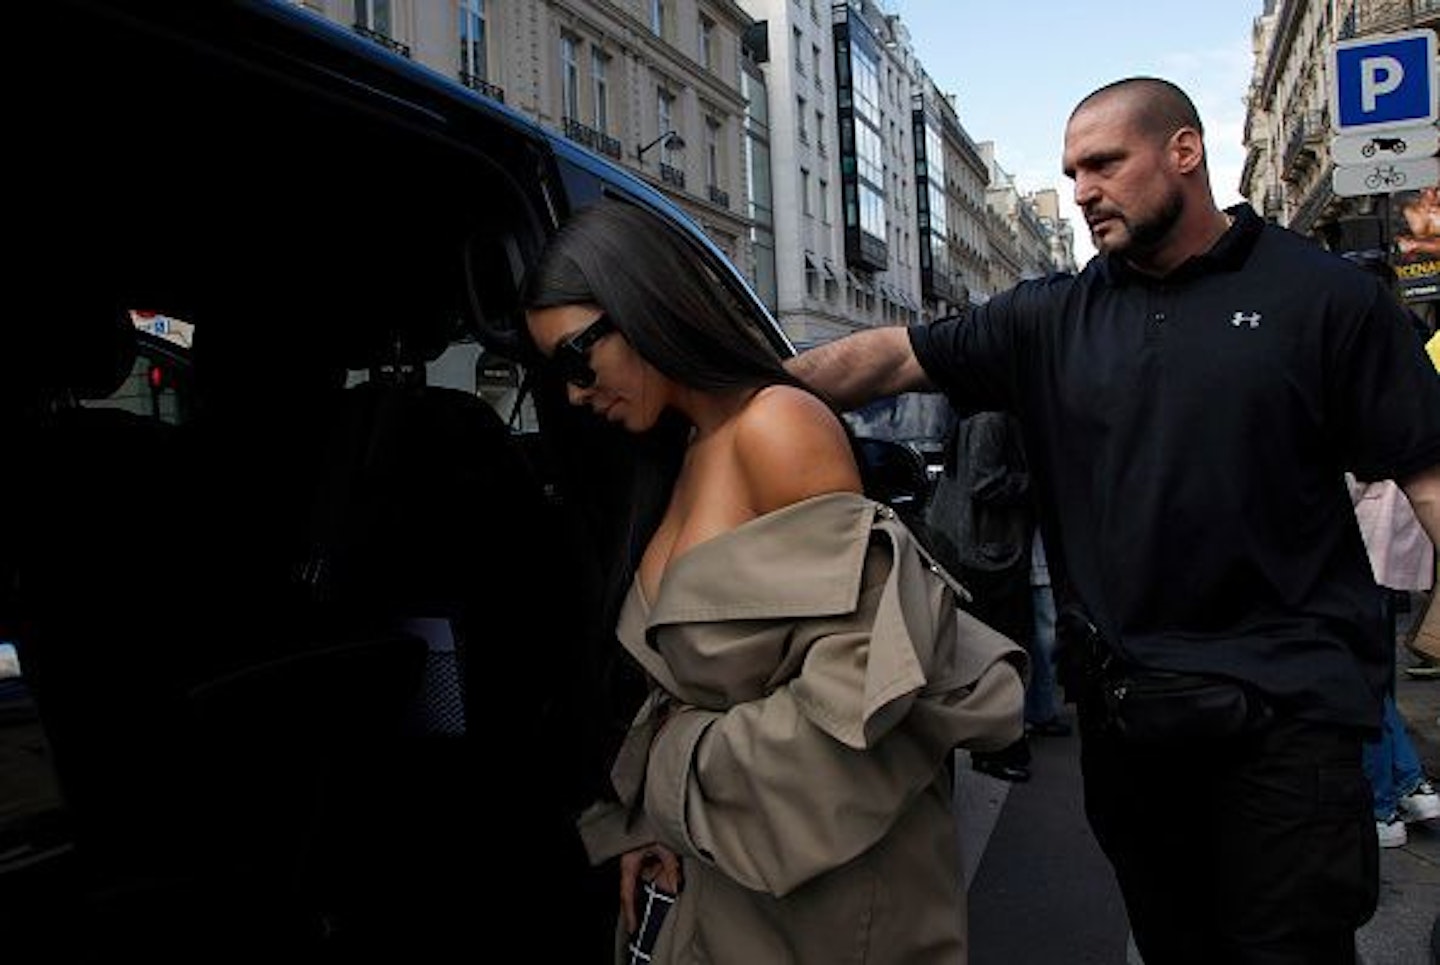 Kim Kardashian Halloween robbery inspired outfit pulled after